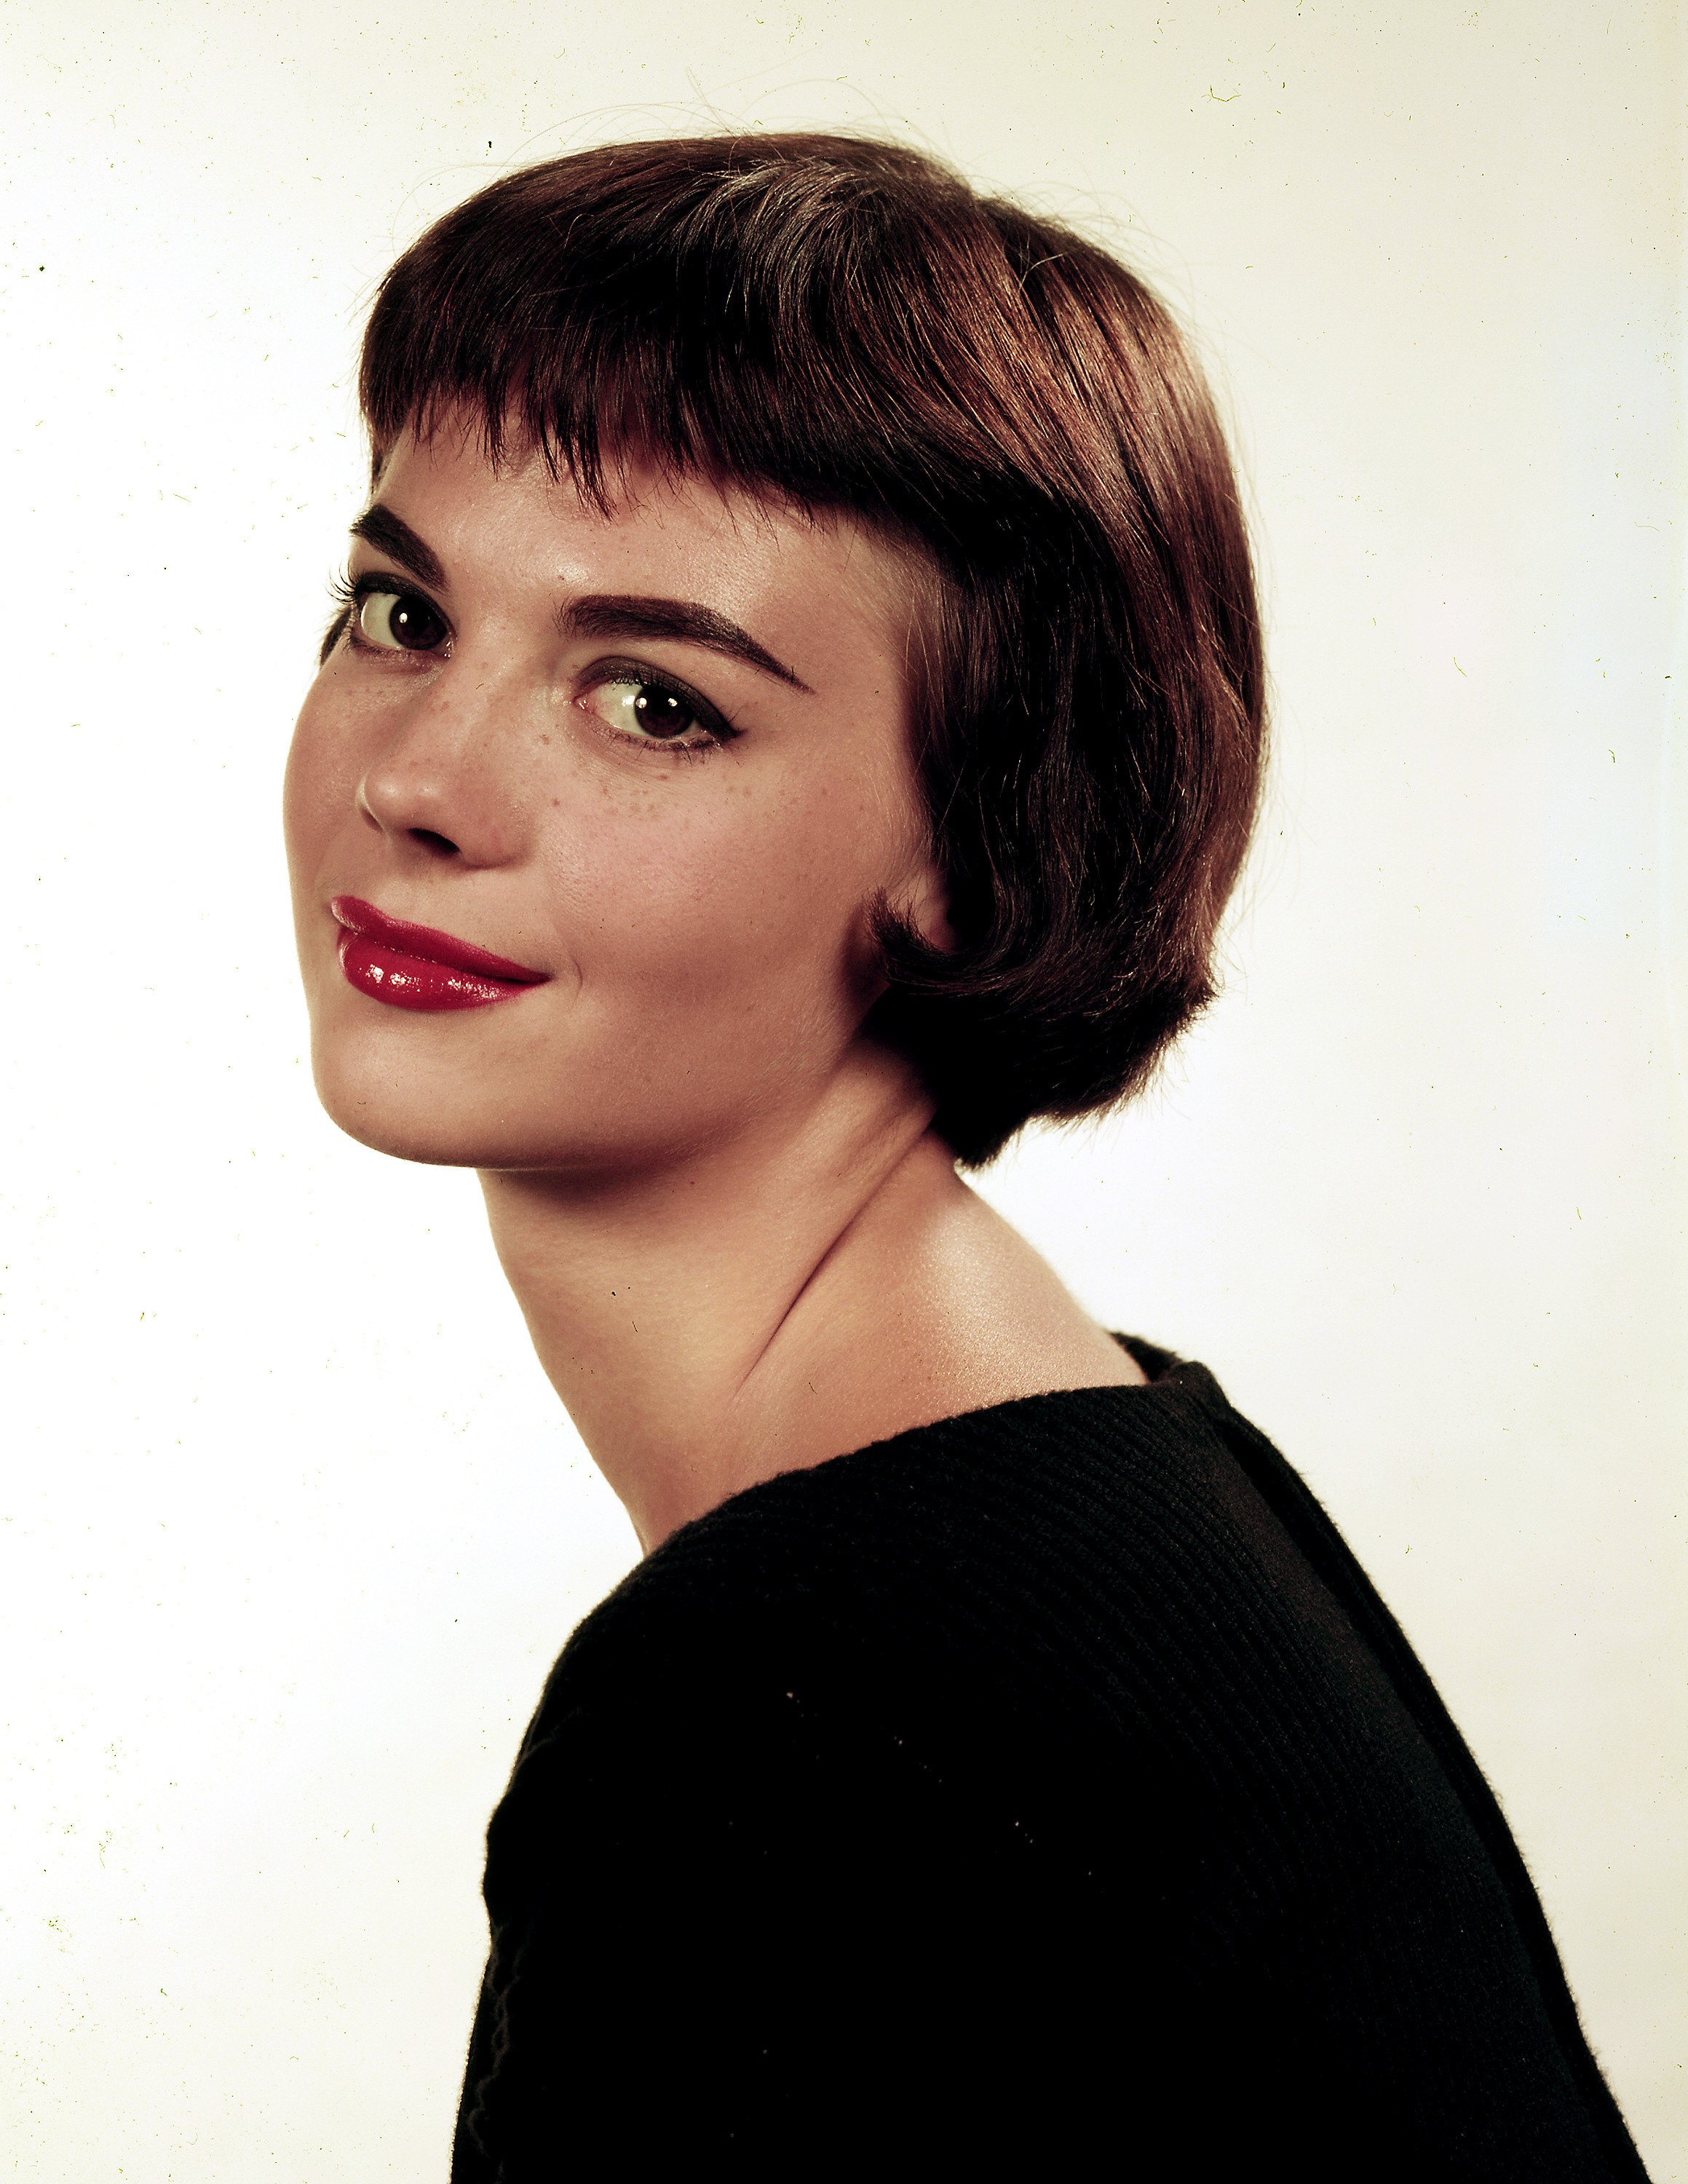 Natalie Wood in the Daily News color studio